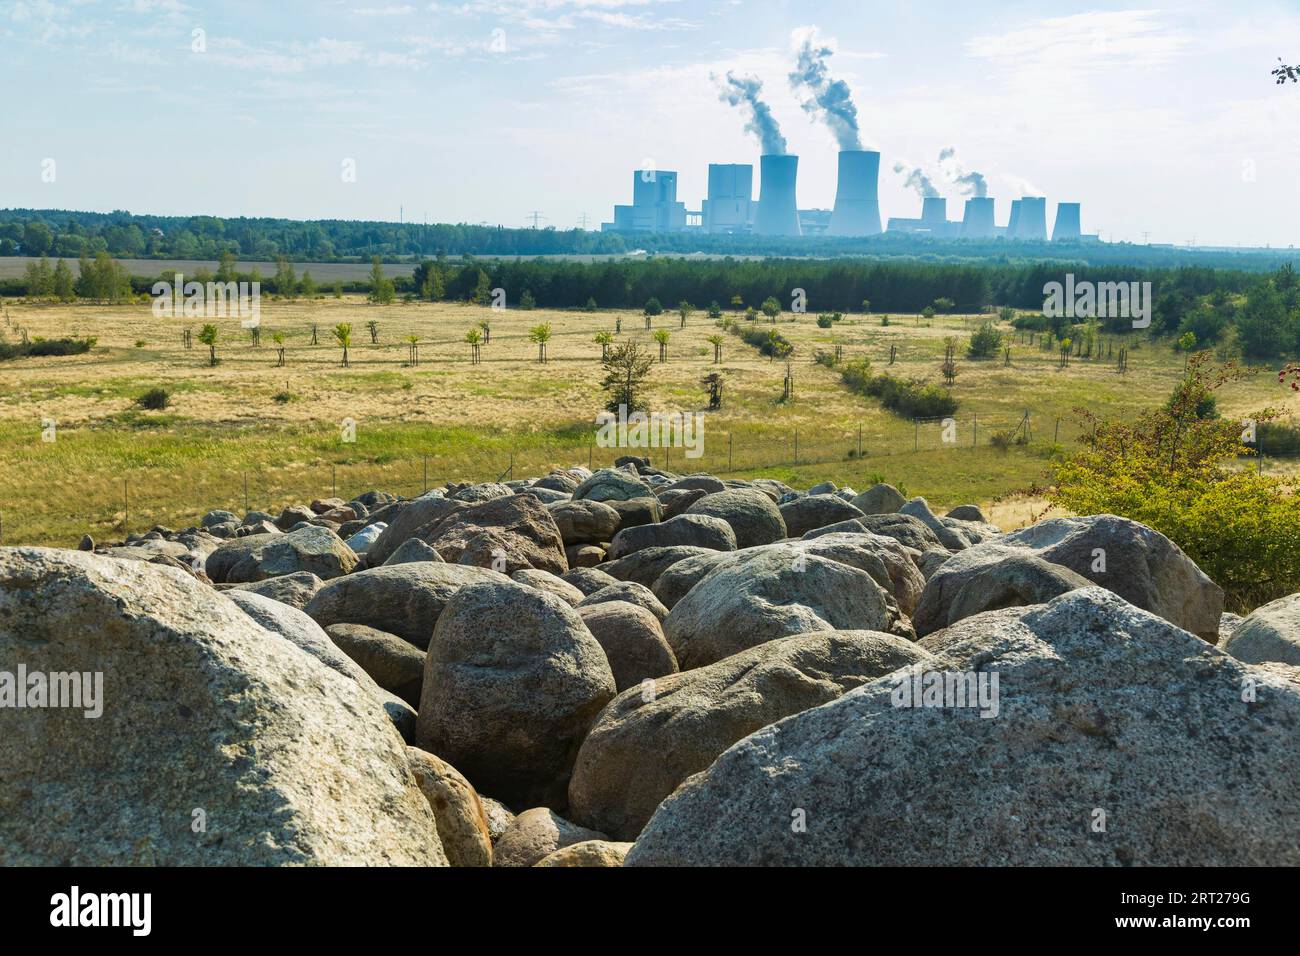 The Boxberg power plant is a German lignite-fired power plant in Boxberg O.L. in Upper Lusatia in the Lusatian lignite mining region. During its Stock Photo